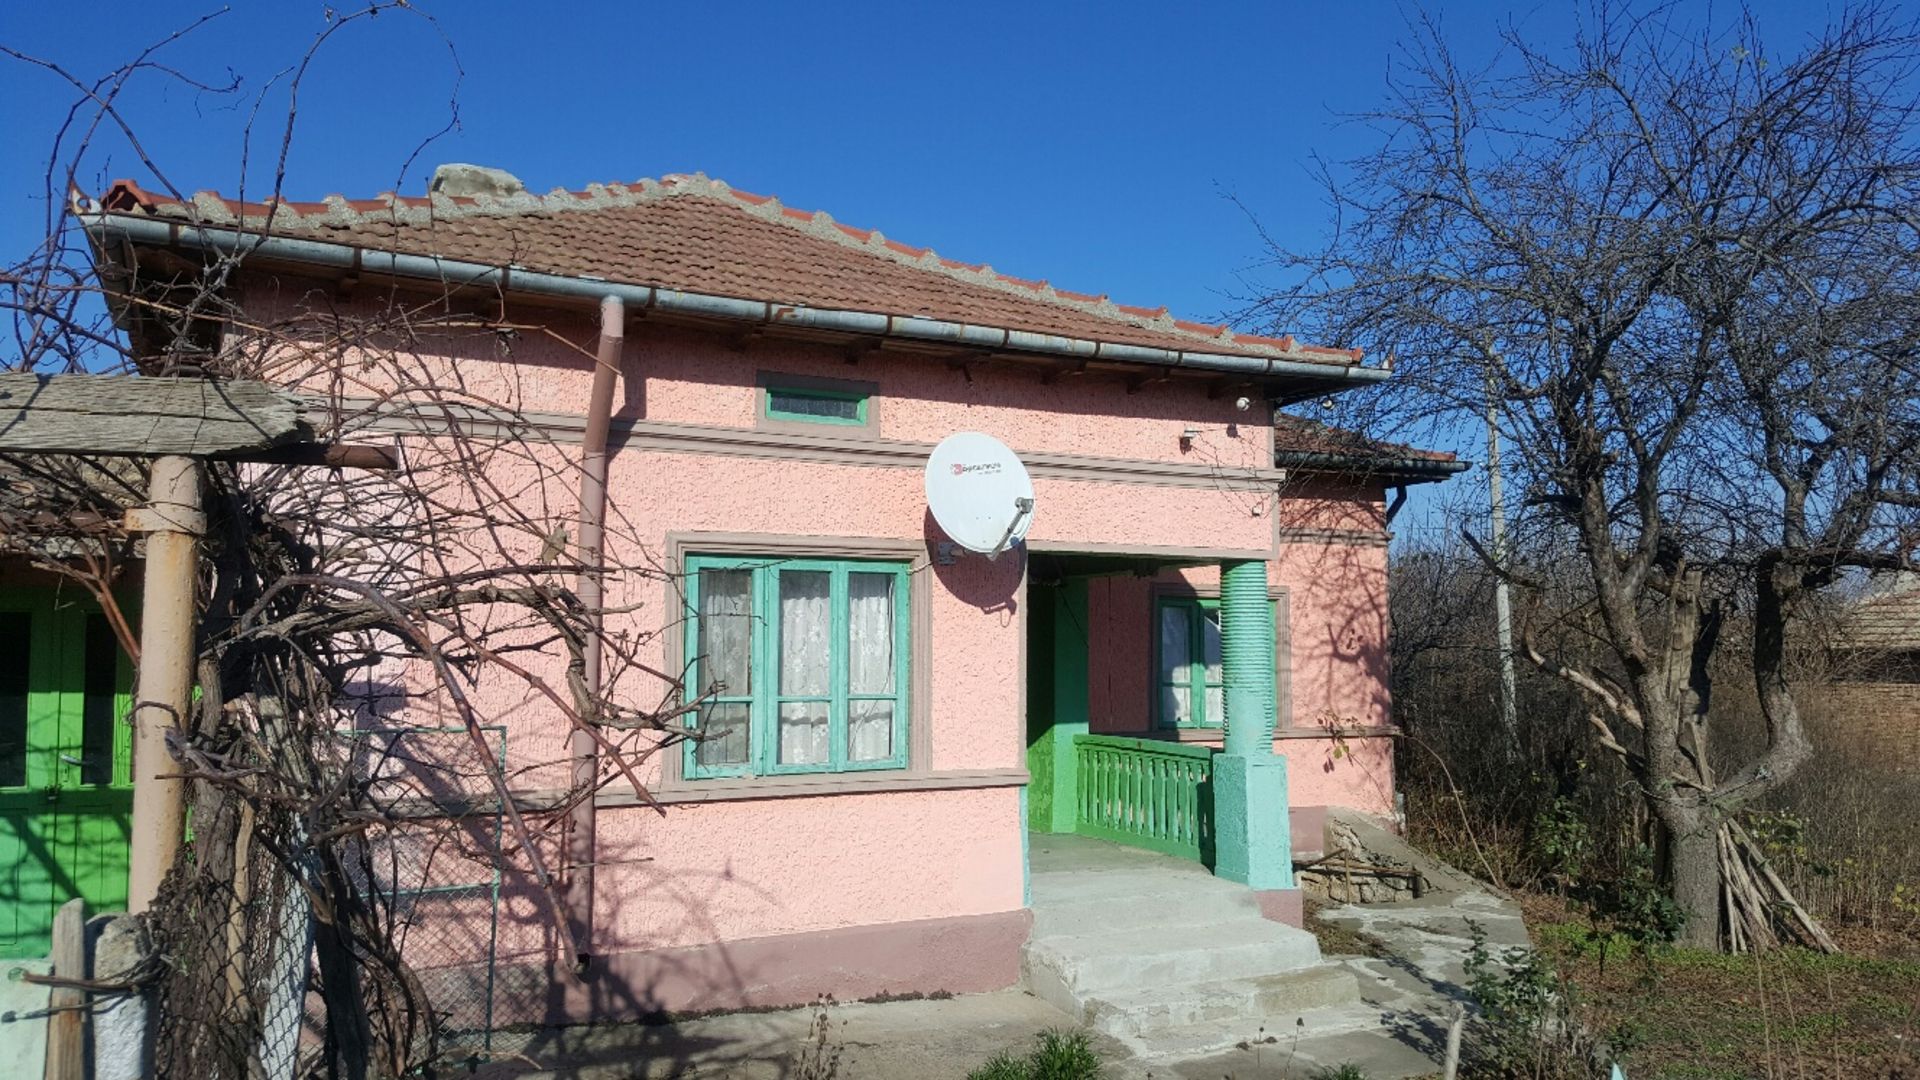 7 ROOM BULGARIAN COTTAGE IN IZVOROVO FOR SALE. WITH LAND NOT FAR FROM COAST - Image 3 of 41